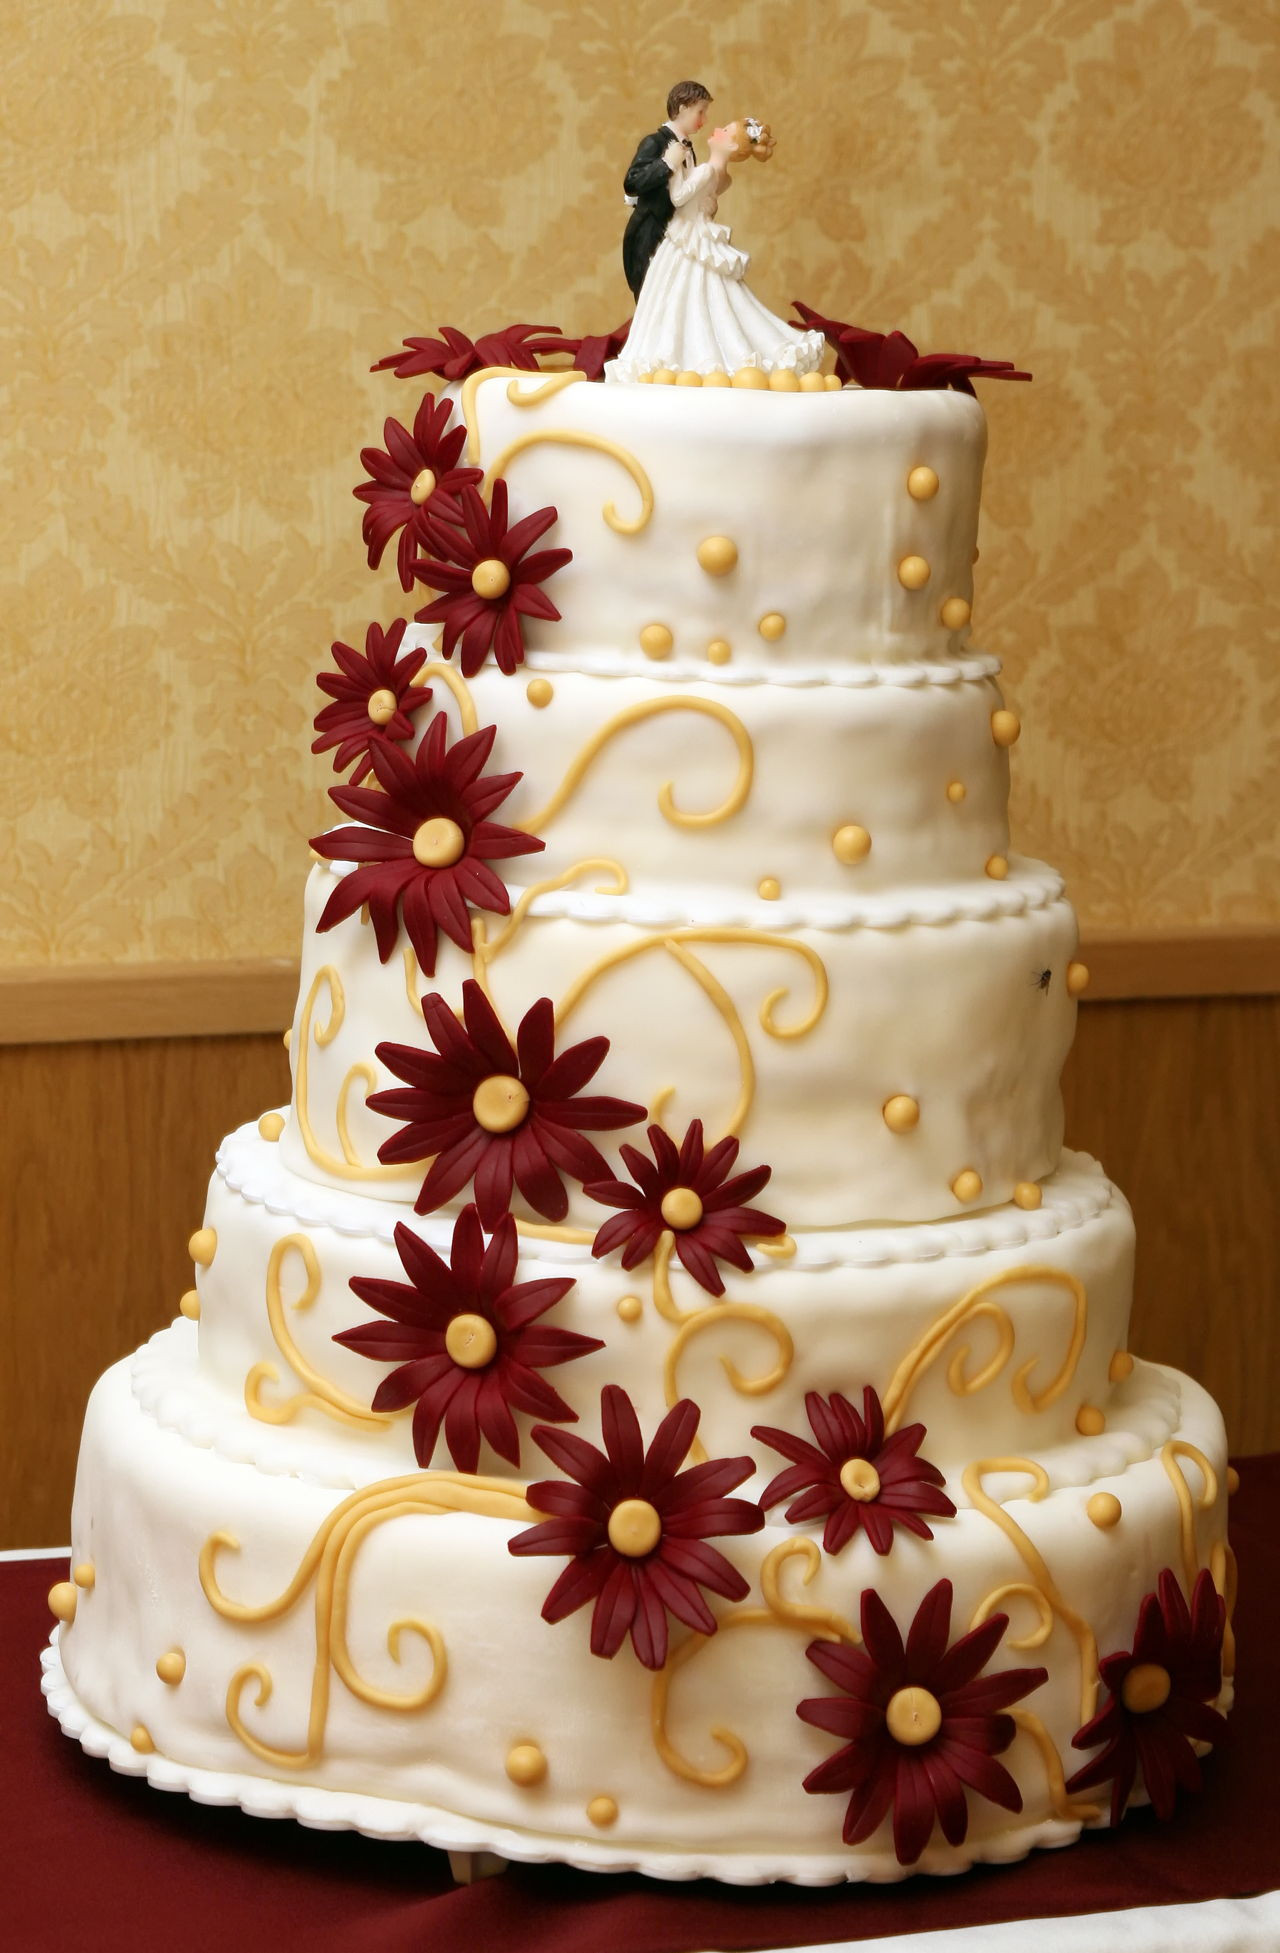 Wedding Cake Recipes
 Bake Your Own Wedding Cake From Scratch With These Great